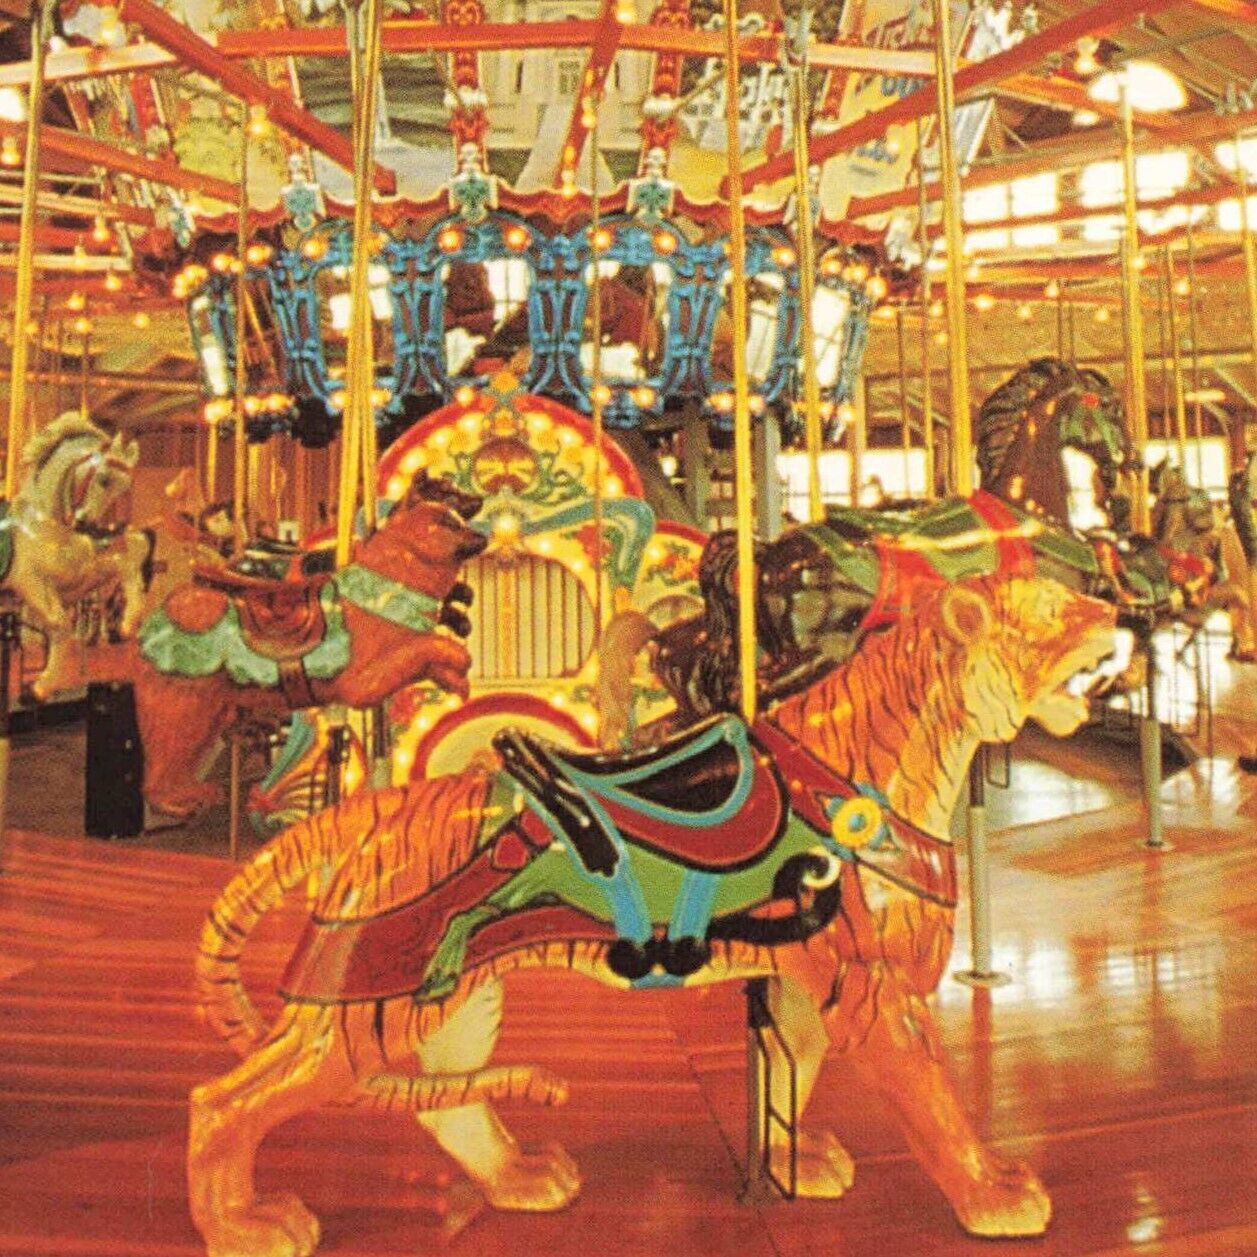 Postcard OH Mansfield Richland Carousal Park Horses Carved Figurines Chariots